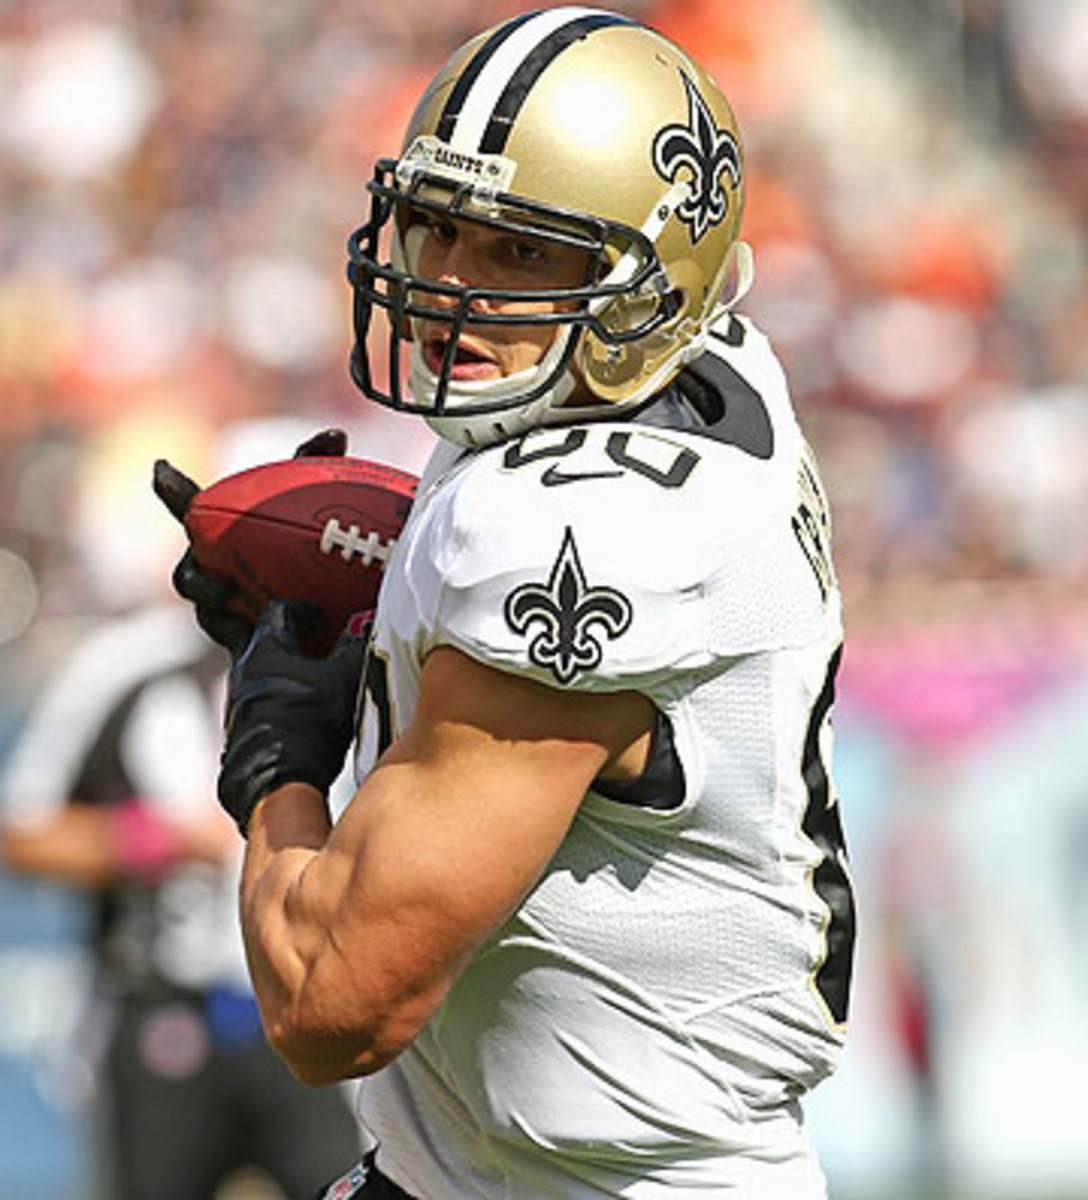 Jimmy Graham was tagged as a tight end, but is expected to file a grievance to be paid as a wide receiver. (Jonathan Daniel/Getty Images)